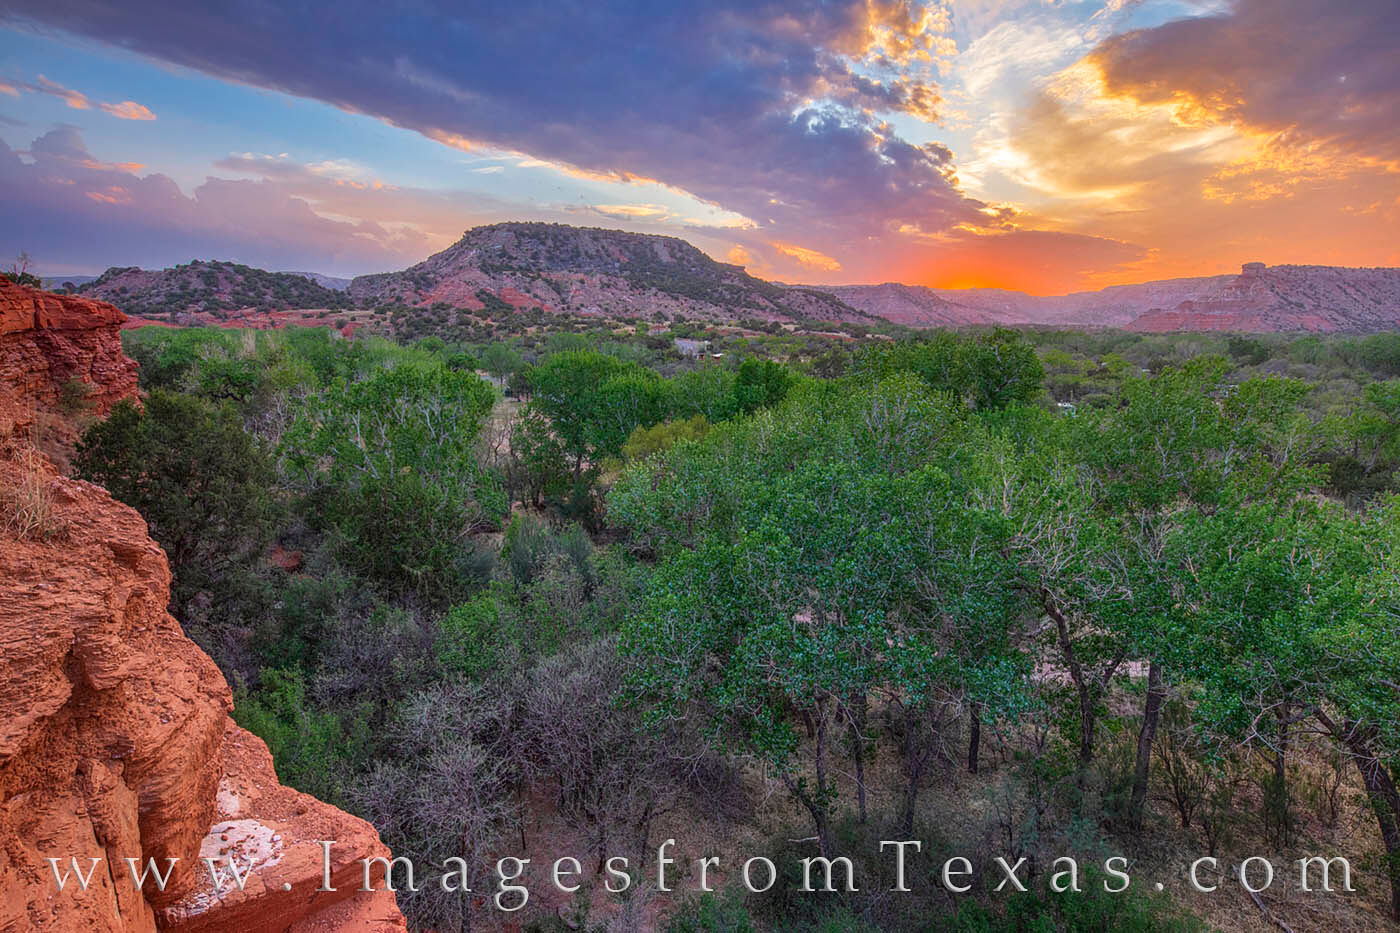 From a cliff high above Hackberry campground in Palo Duro Canyon, the even sky put on a show after storms had rolled through...